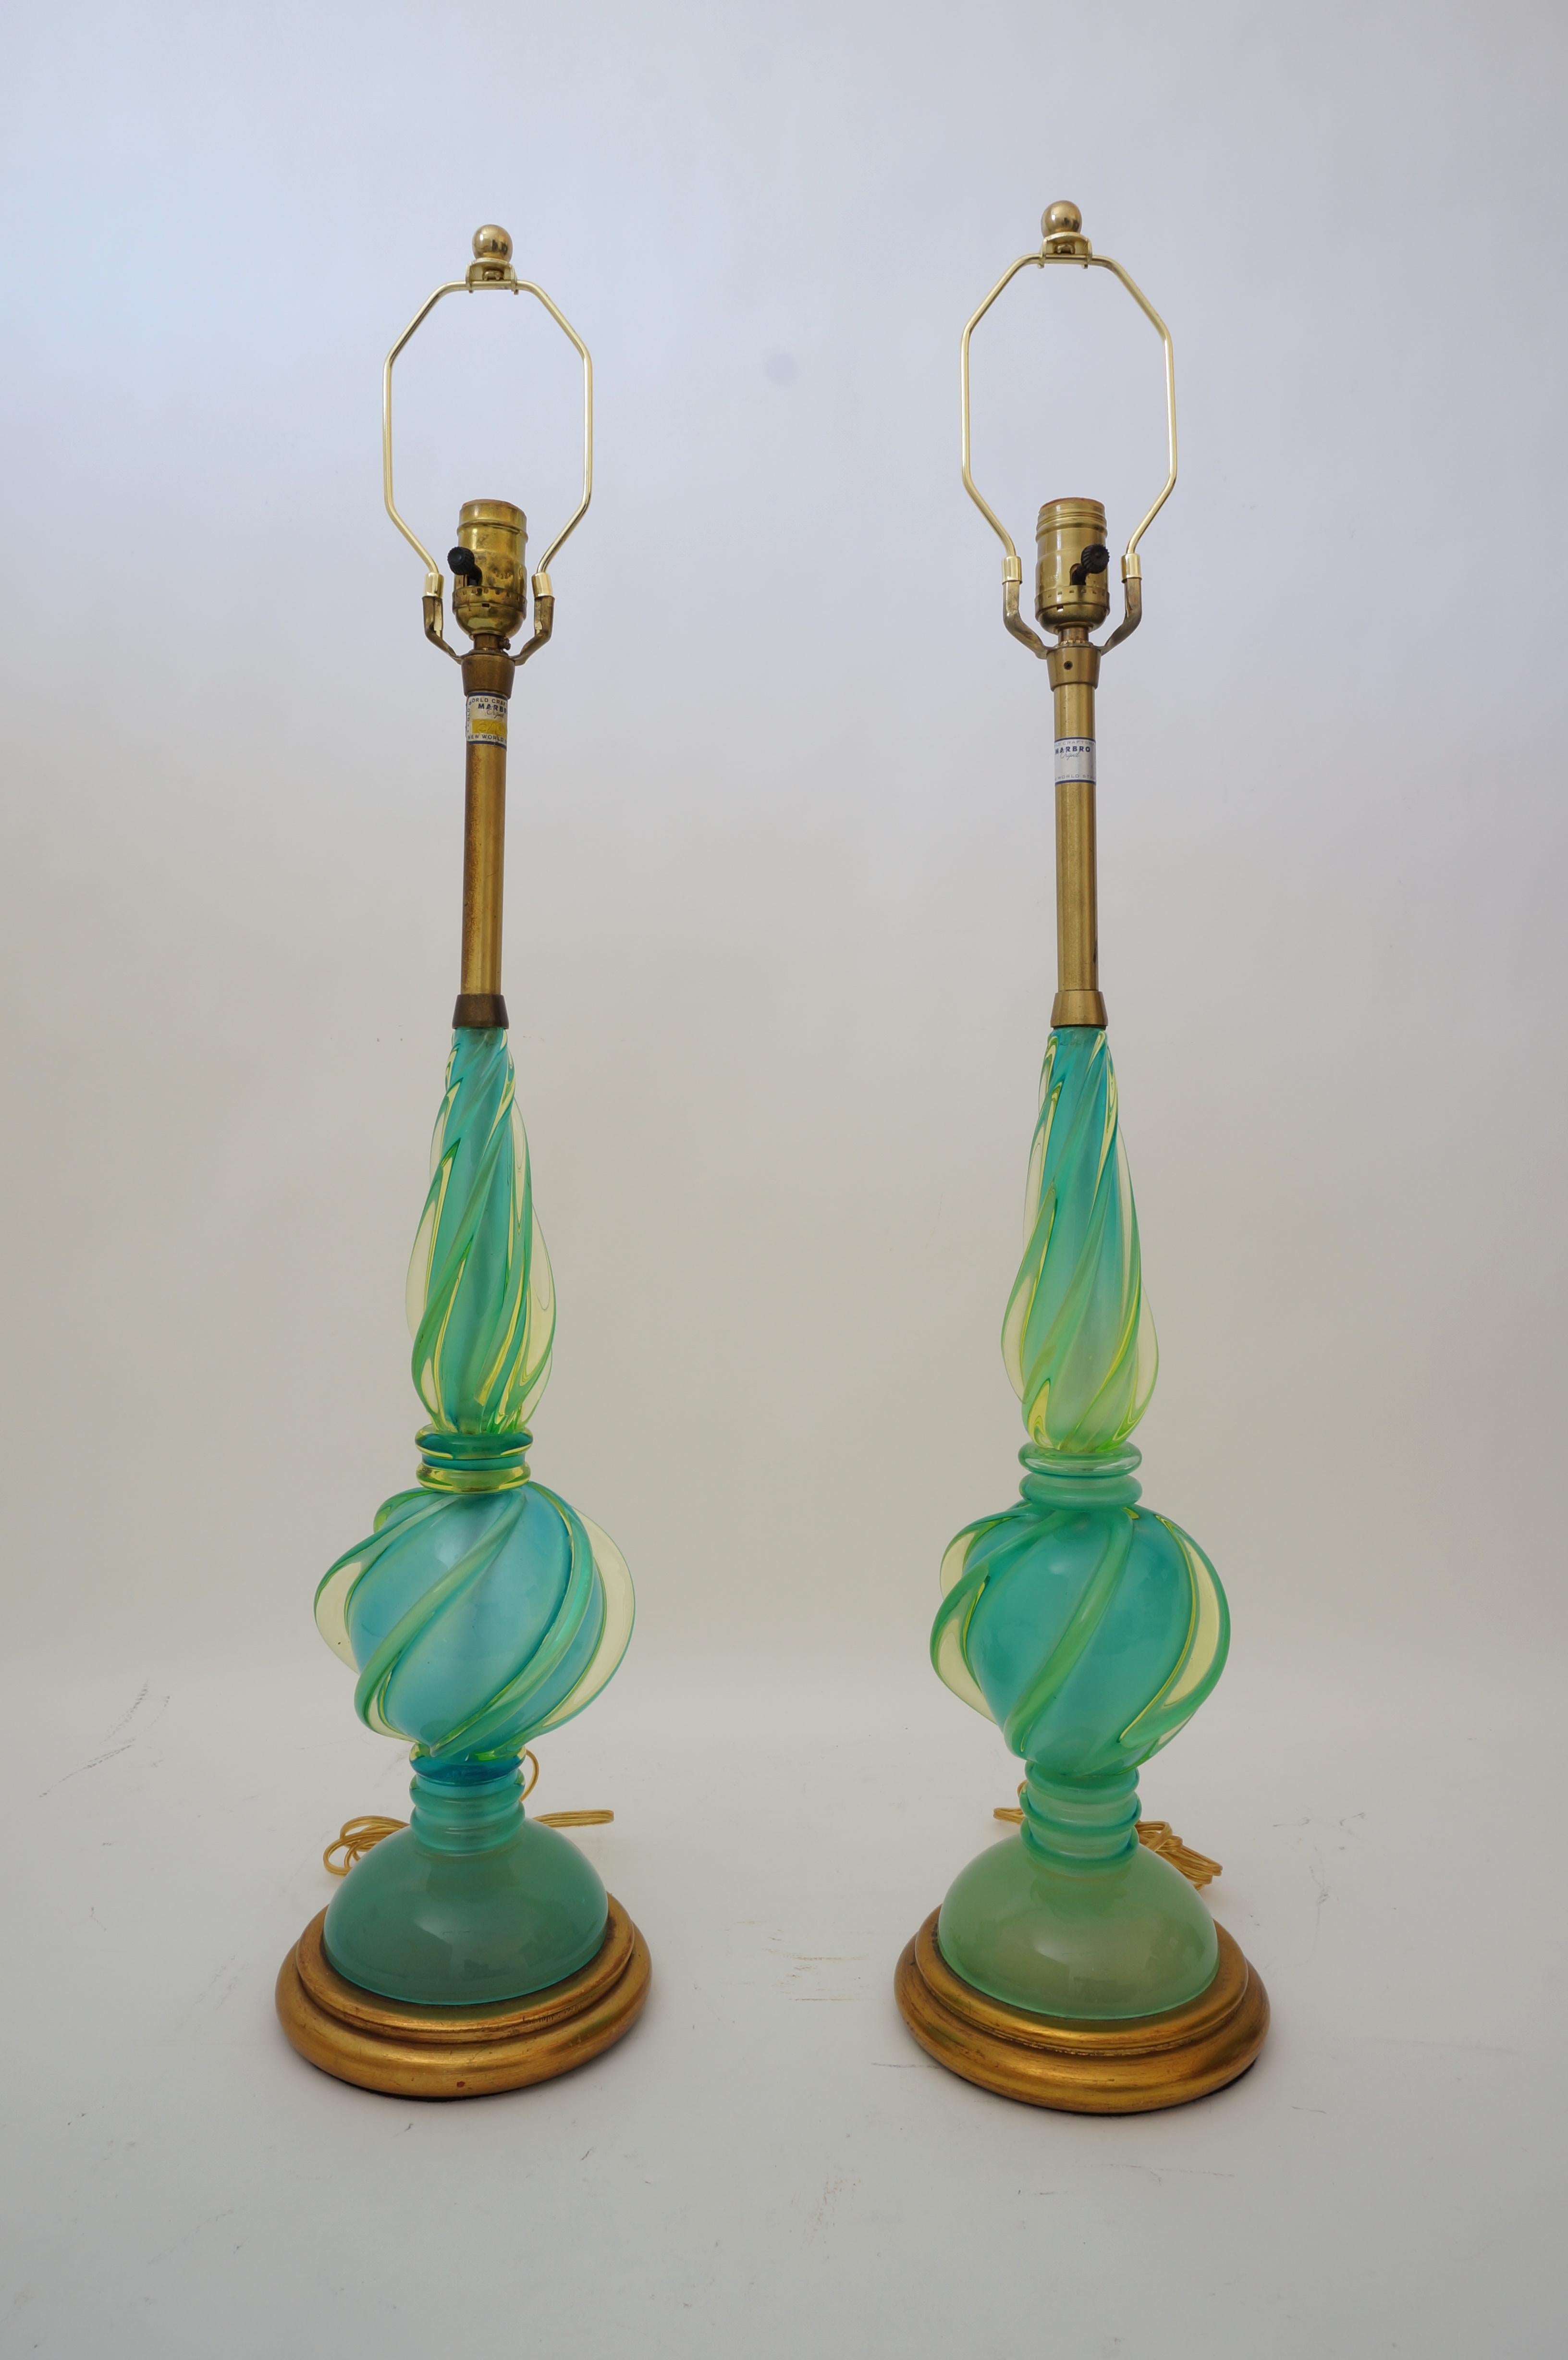 Hollywood Regency Pair of Marbro Seguso Murano Glass Lamps For Sale